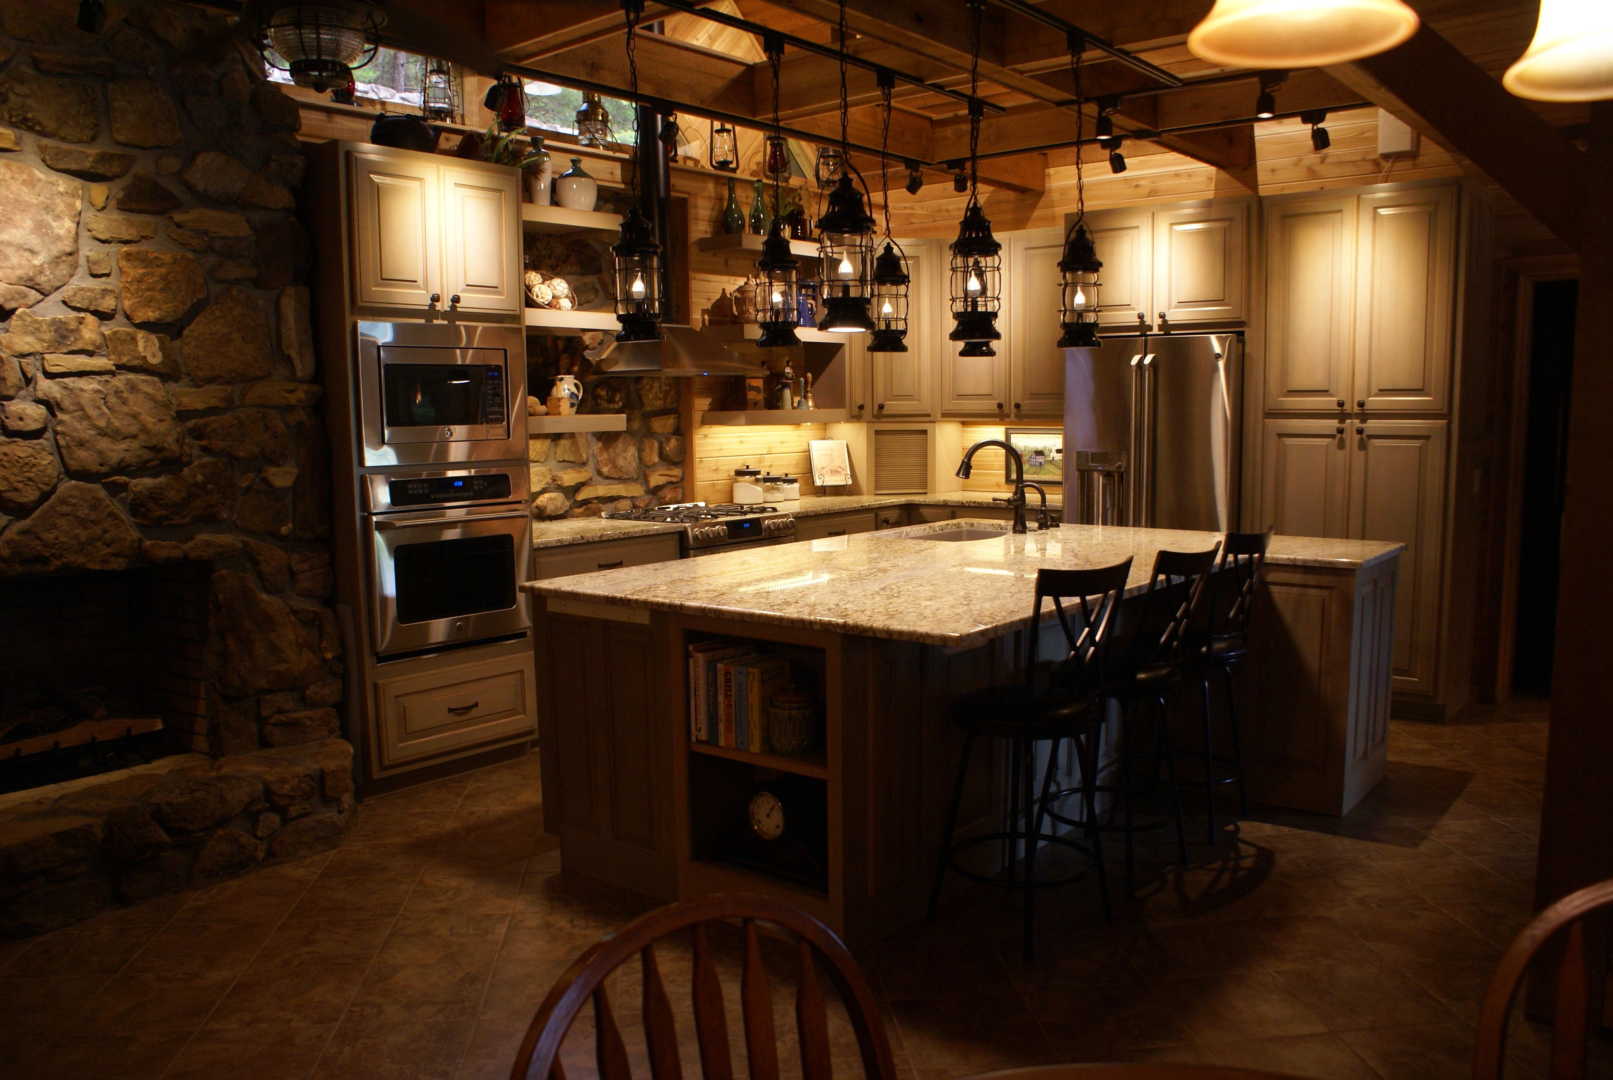 A kitchen with an island and many lights.